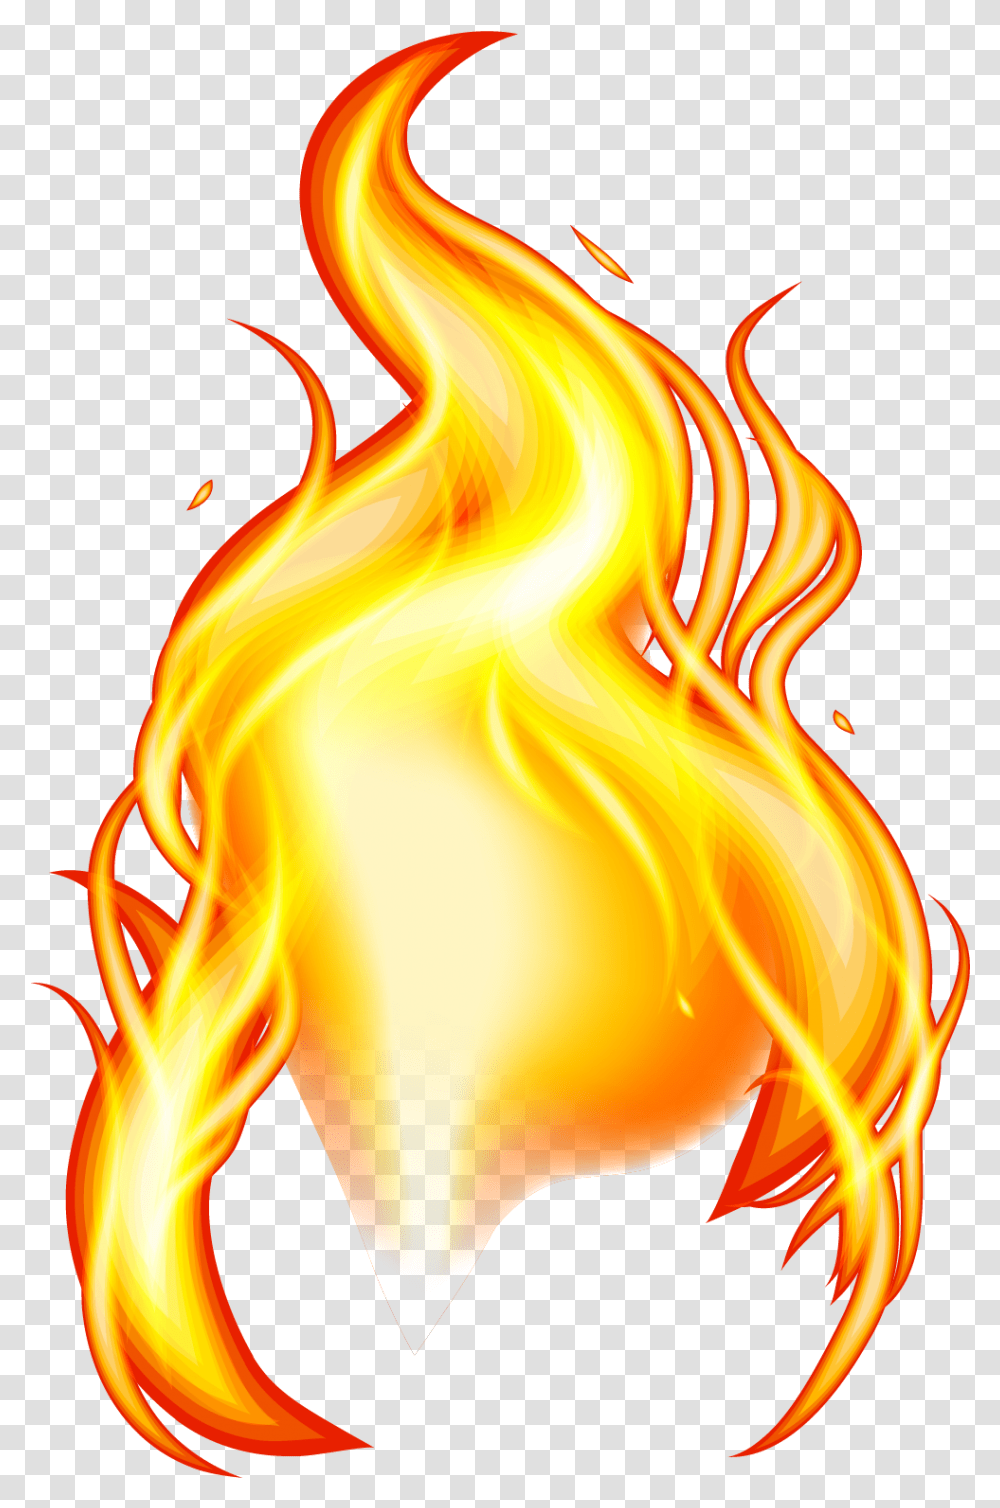 Download 15 Fire Cartoon For Free Real Fire Effect, Flame, Bonfire Transparent Png